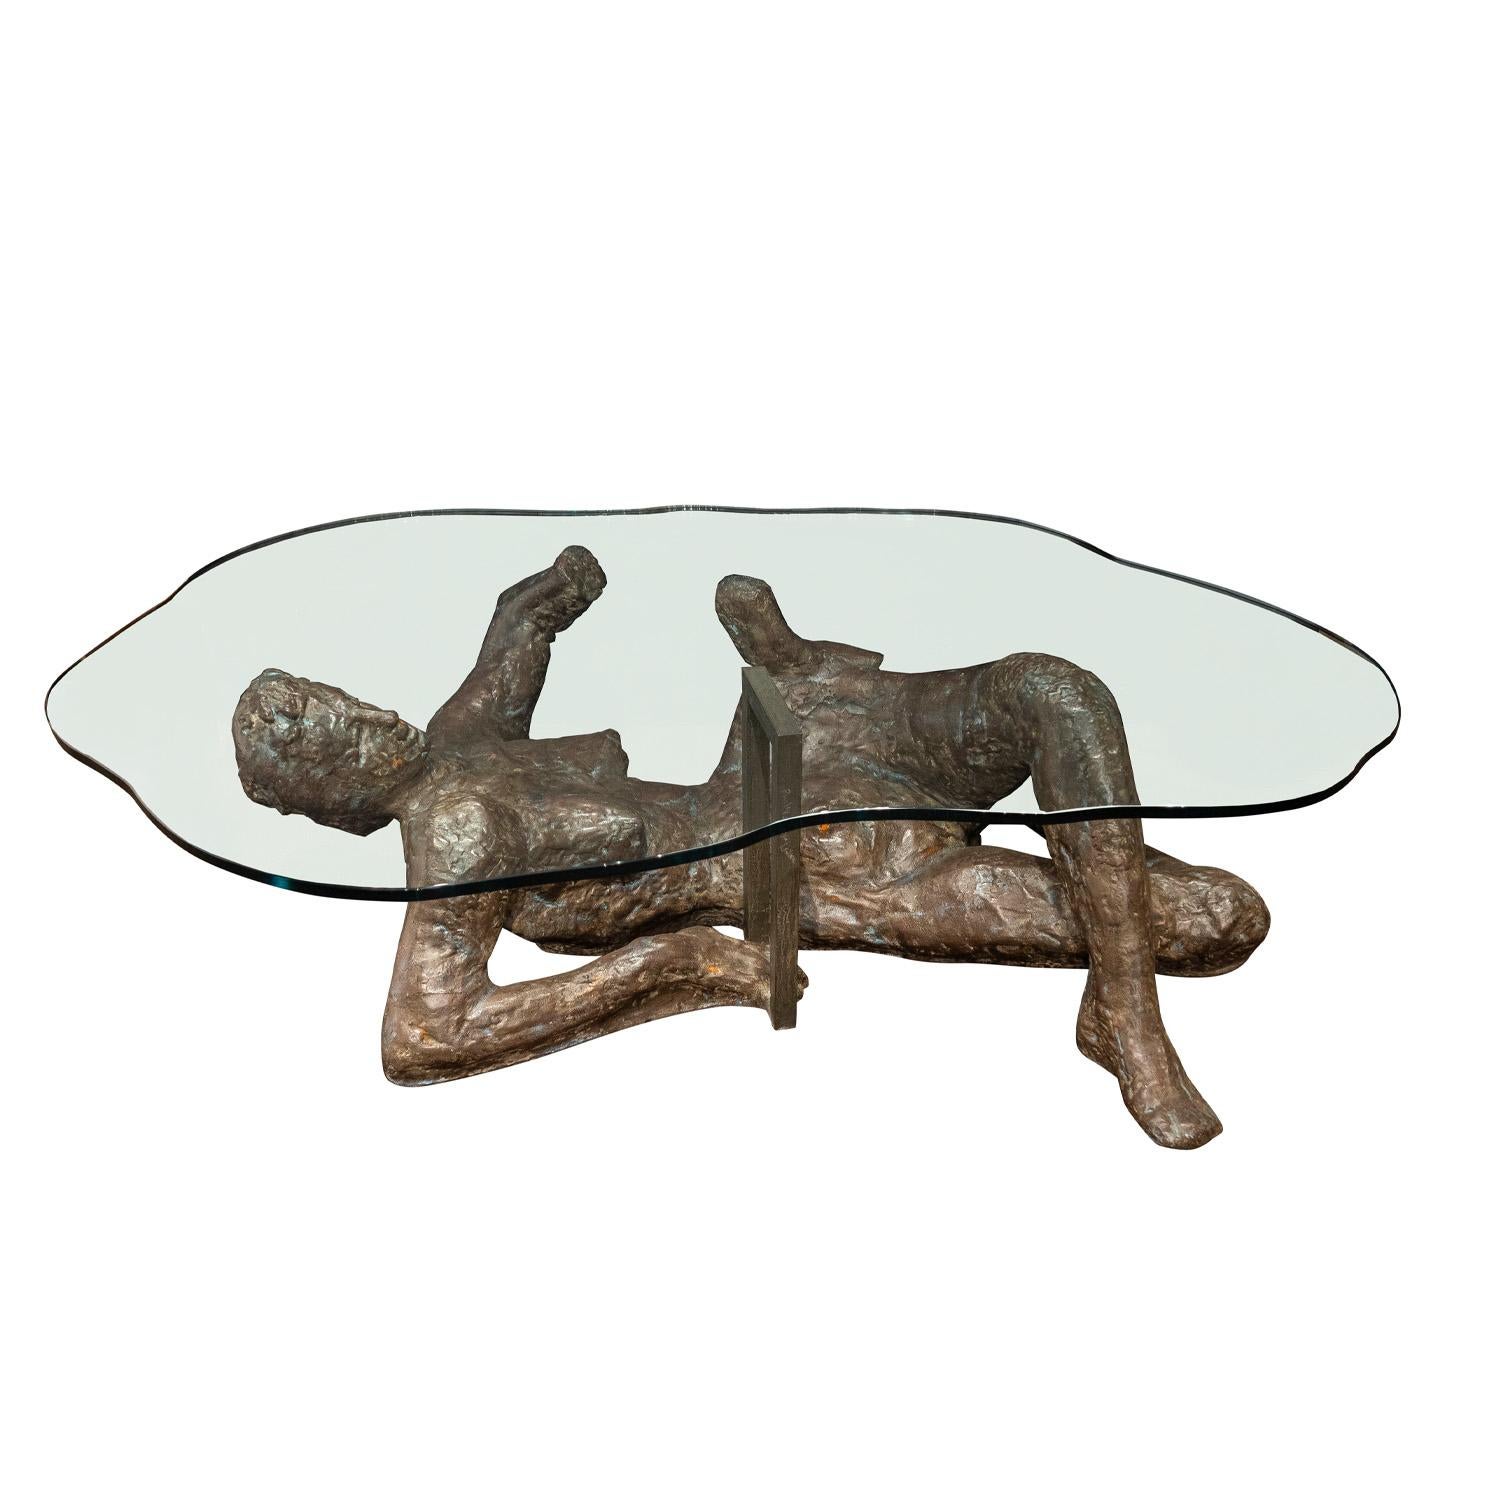 Extremely rare and important cast bronze “Me Too” coffee table, female figural sculpture with multicolor hand painted enamels with biomorphic glass top, by Philip and Kelvin LaVerne, American 1970's (Signed “Philip+Kelvin LaVerne” on supporting